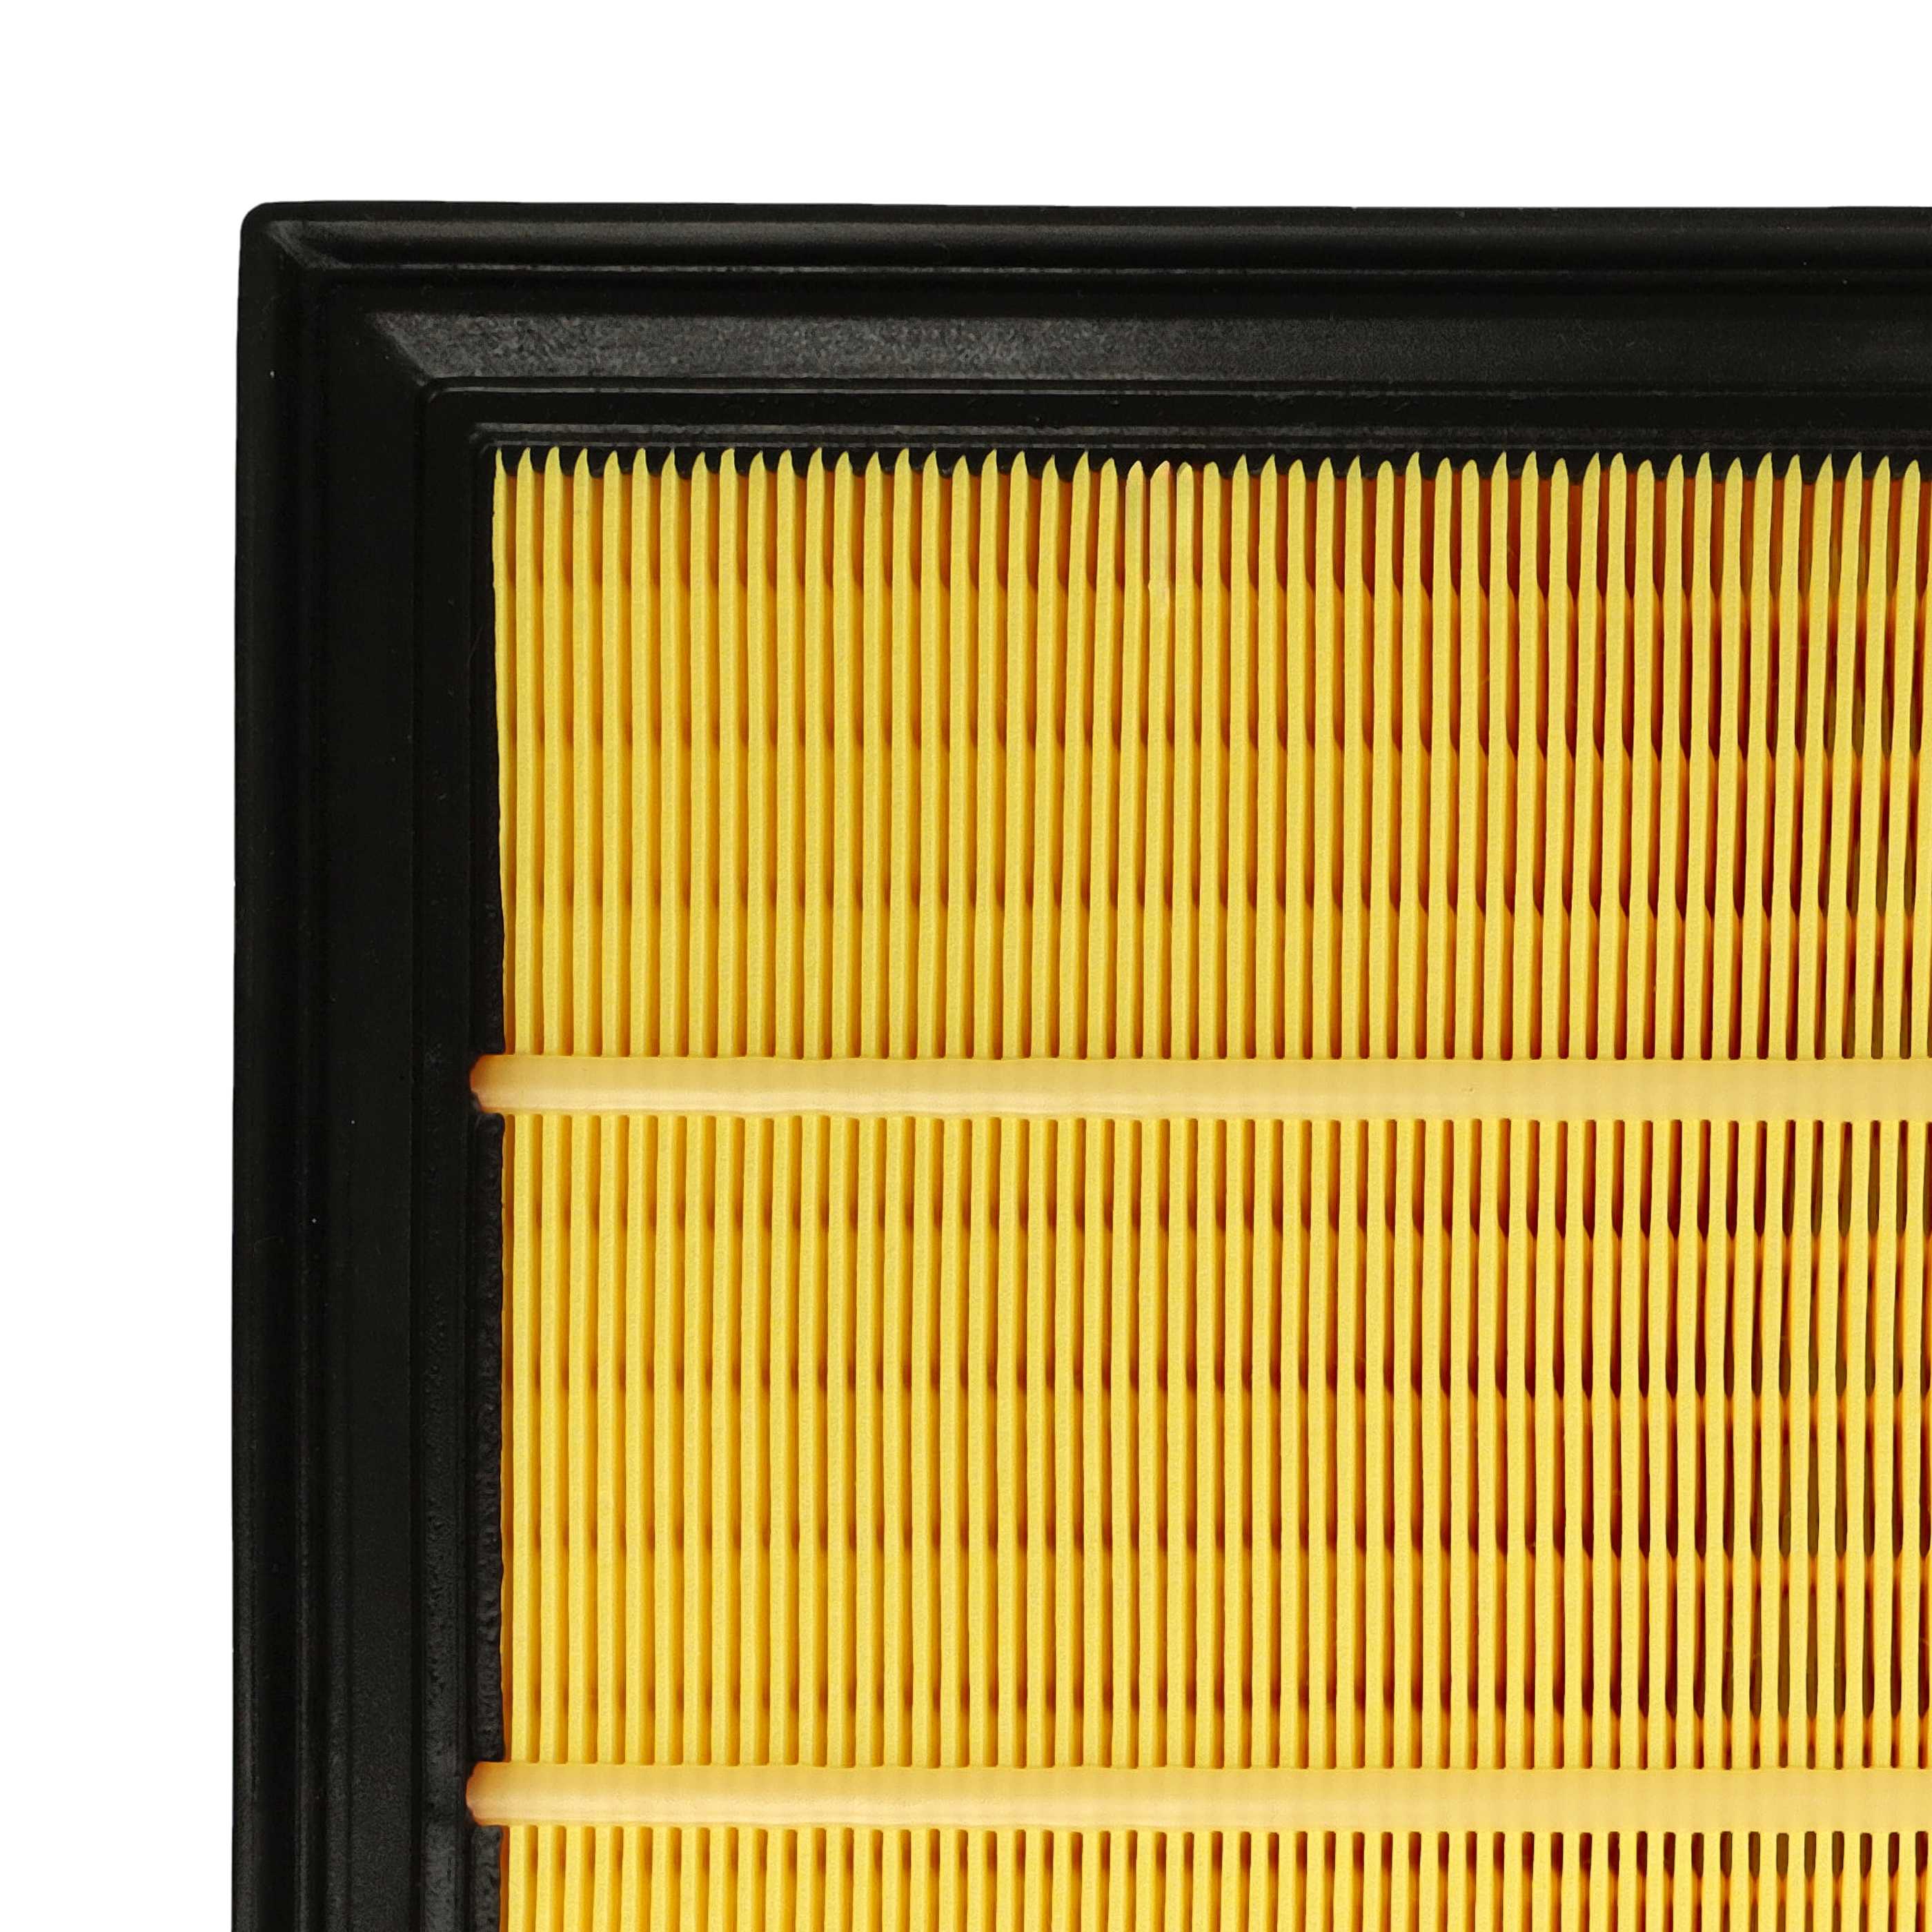 1x flat pleated filter replaces 61605 for Hako Vacuum Cleaner